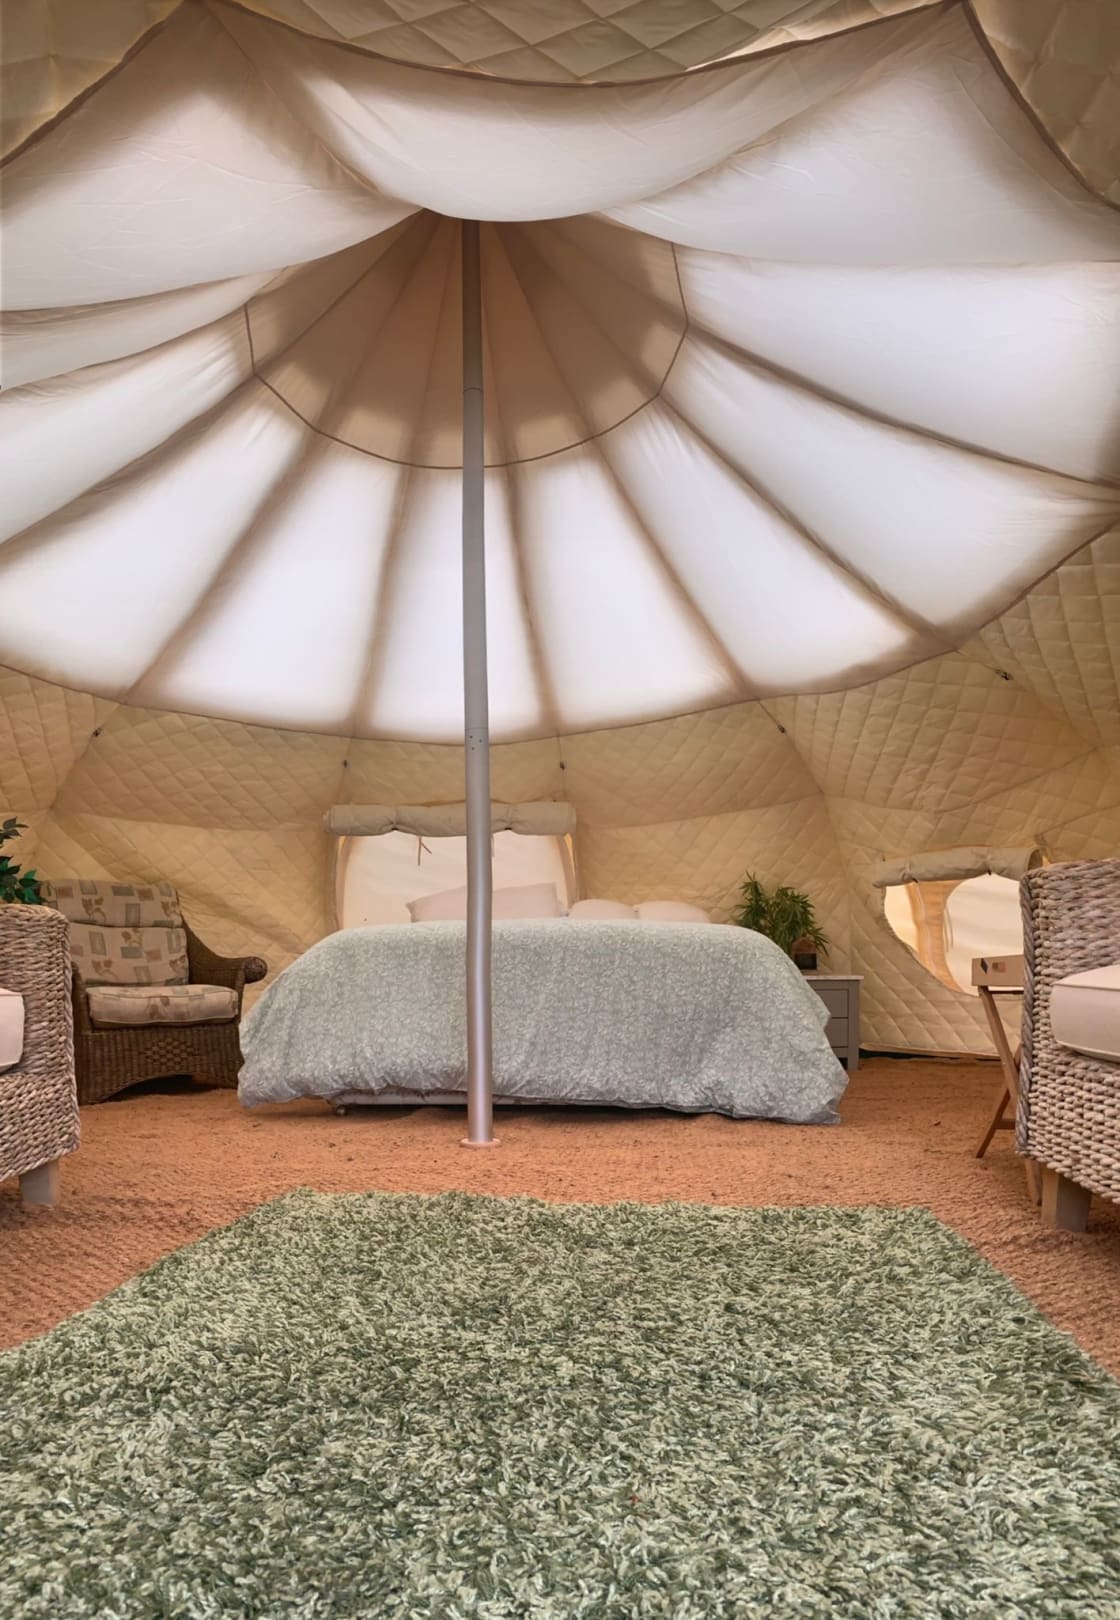 Forest Glamping Retreat